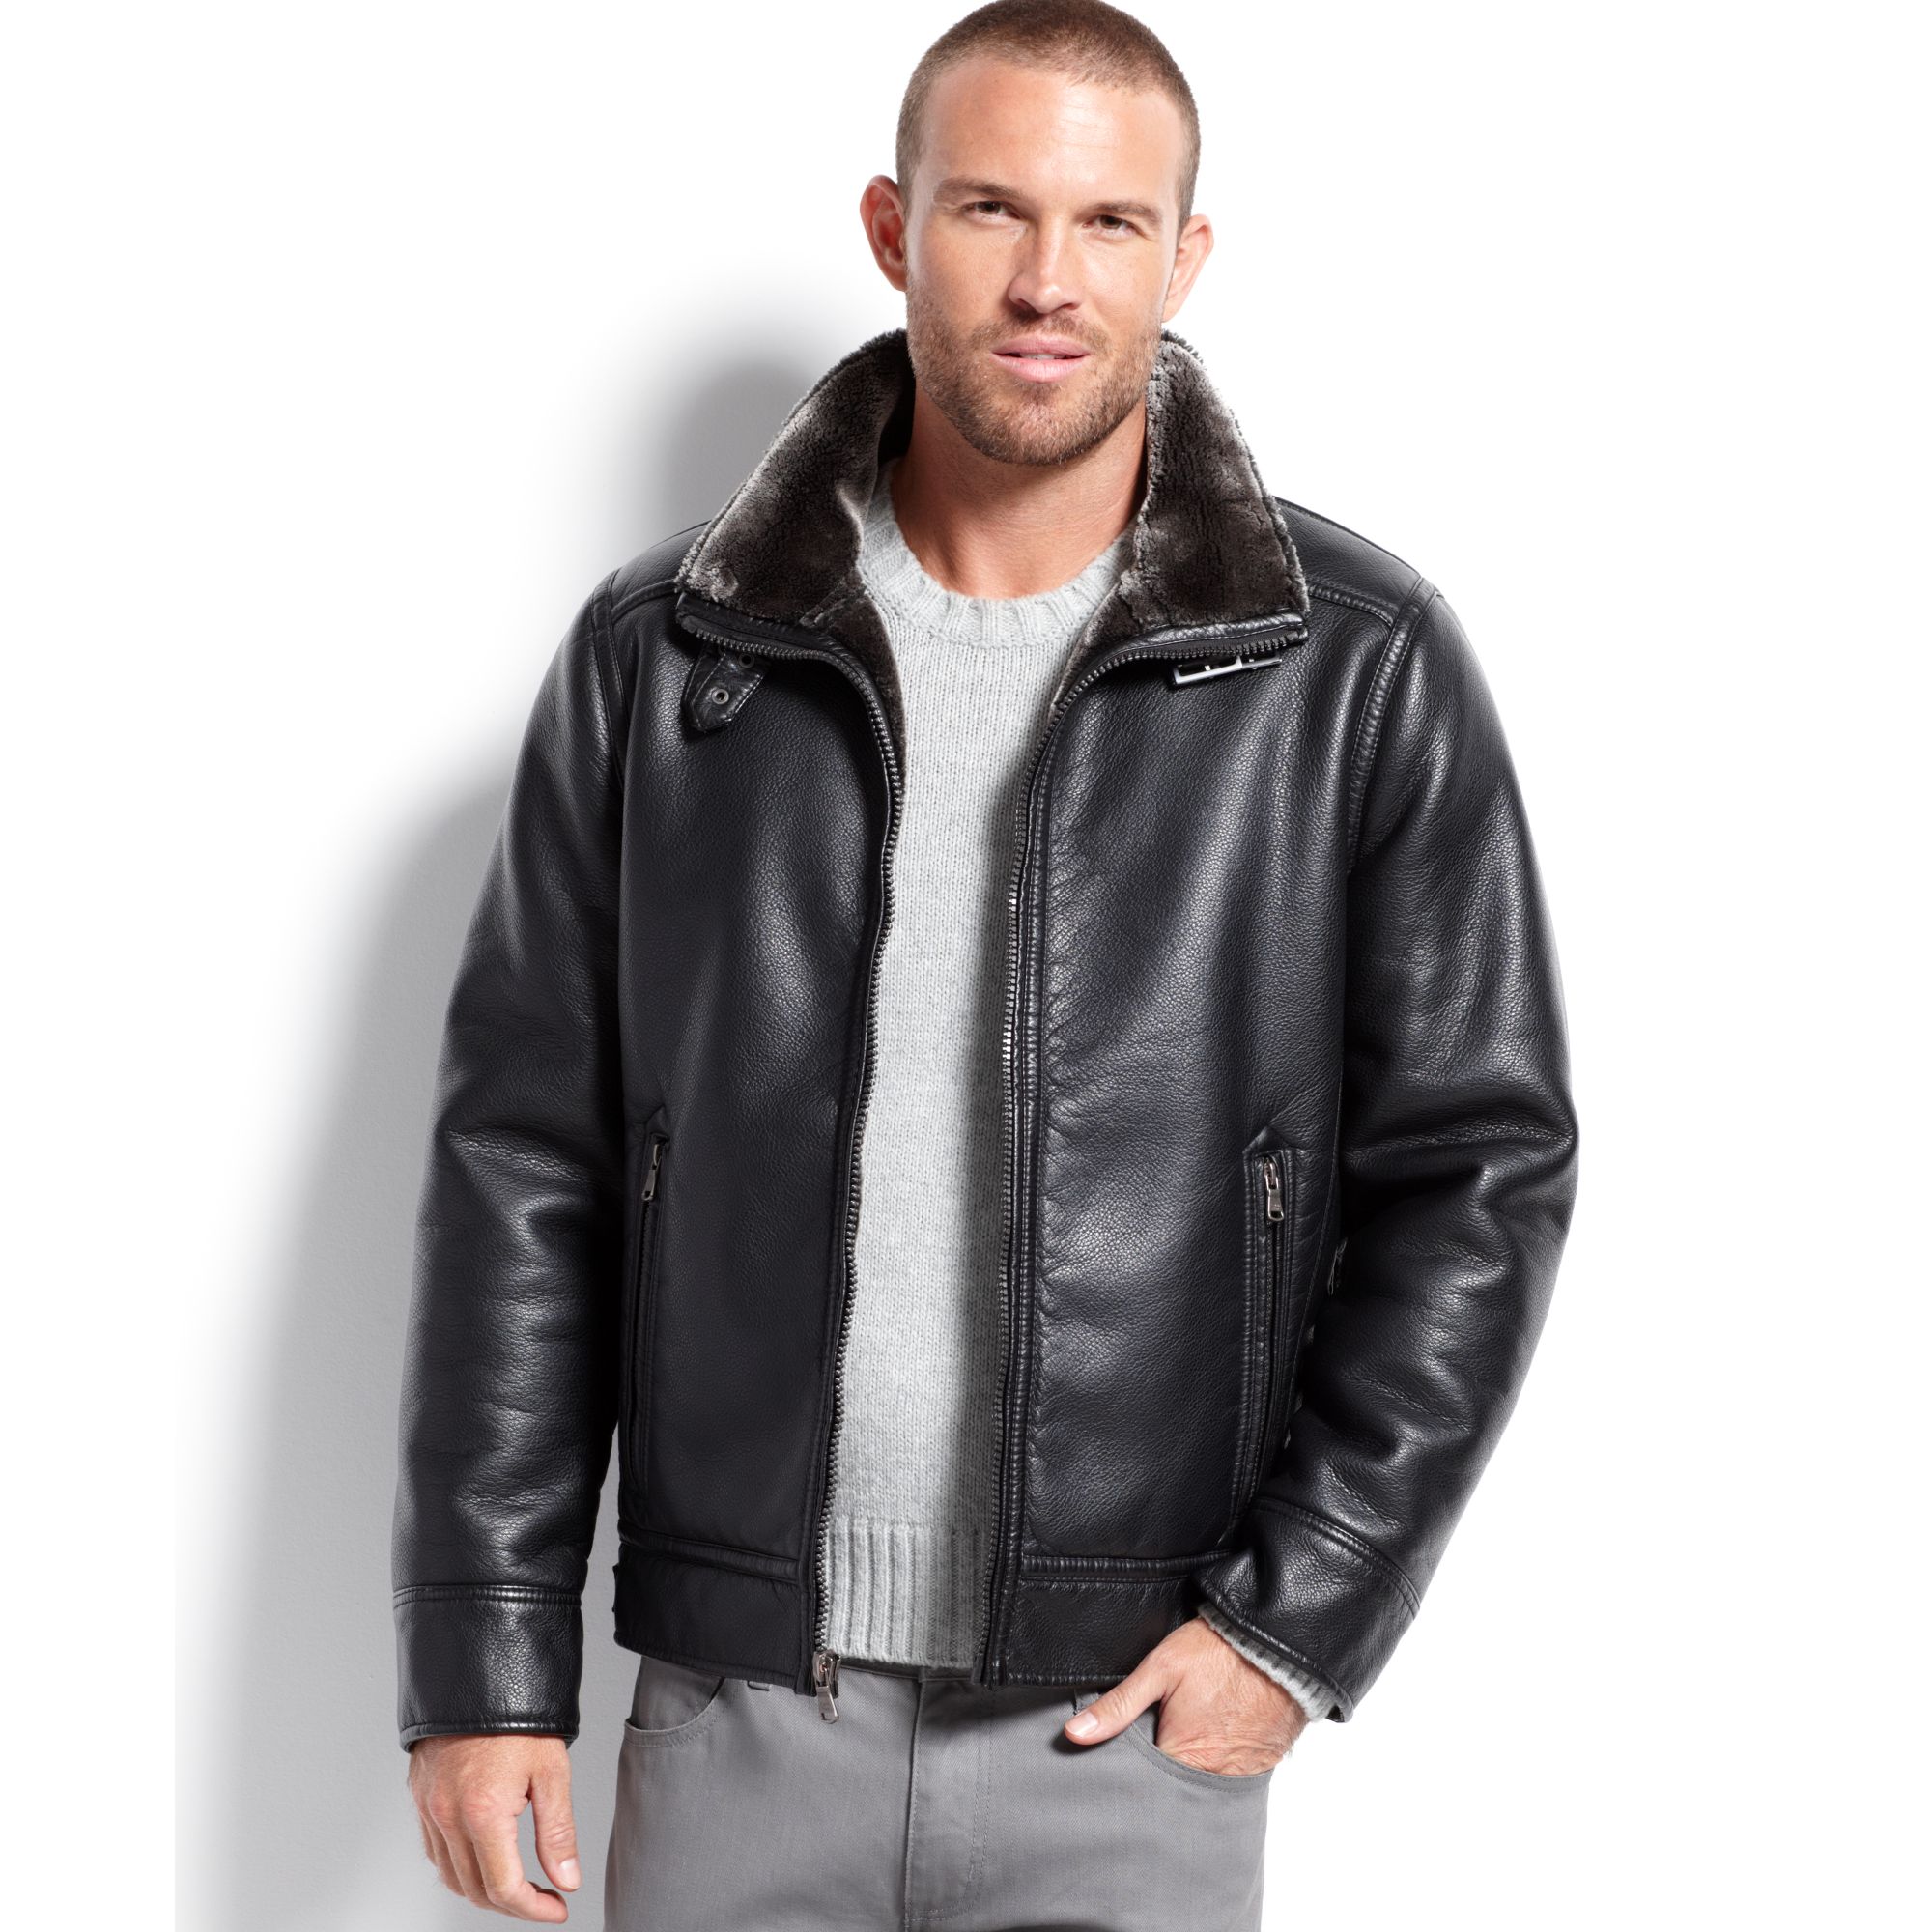 Calvin Klein Jackets India Hotsell, 43% OFF | www.cacsud22.com